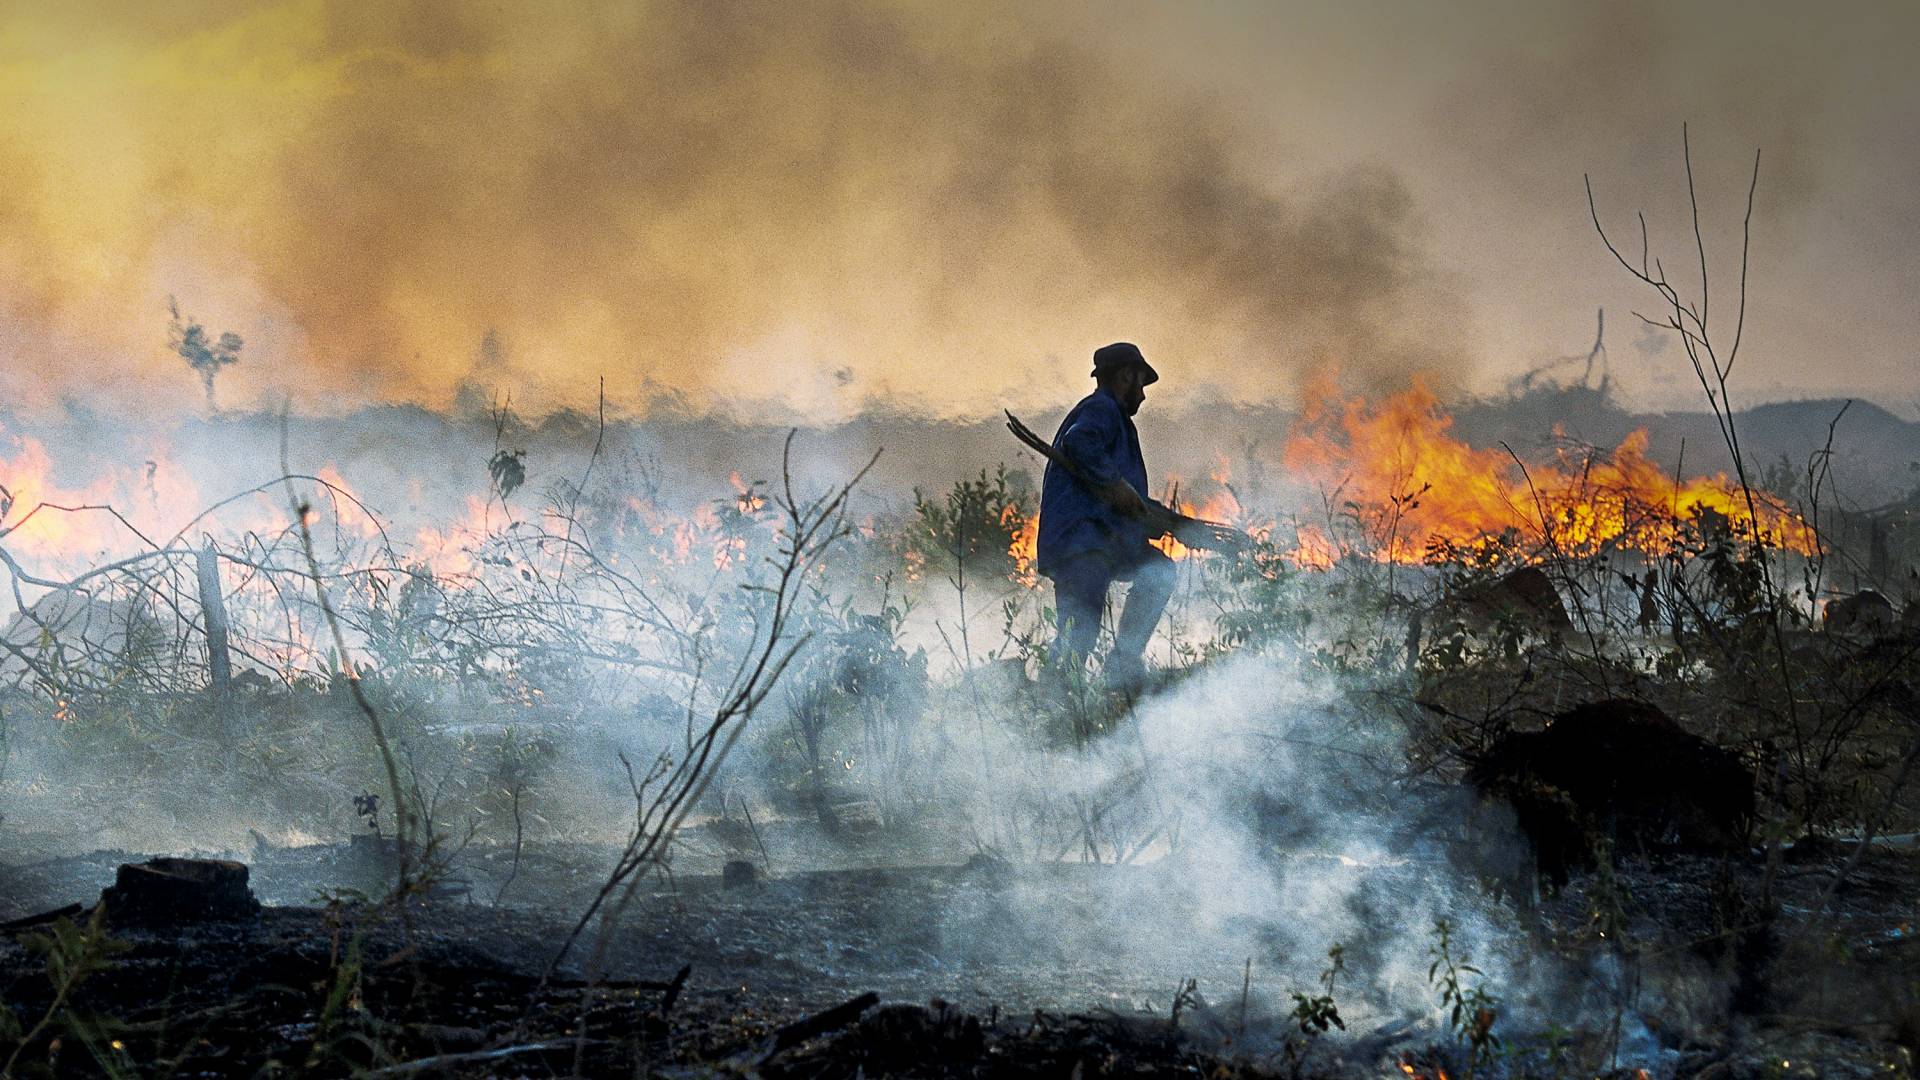 A man standing in smoke among burned trees